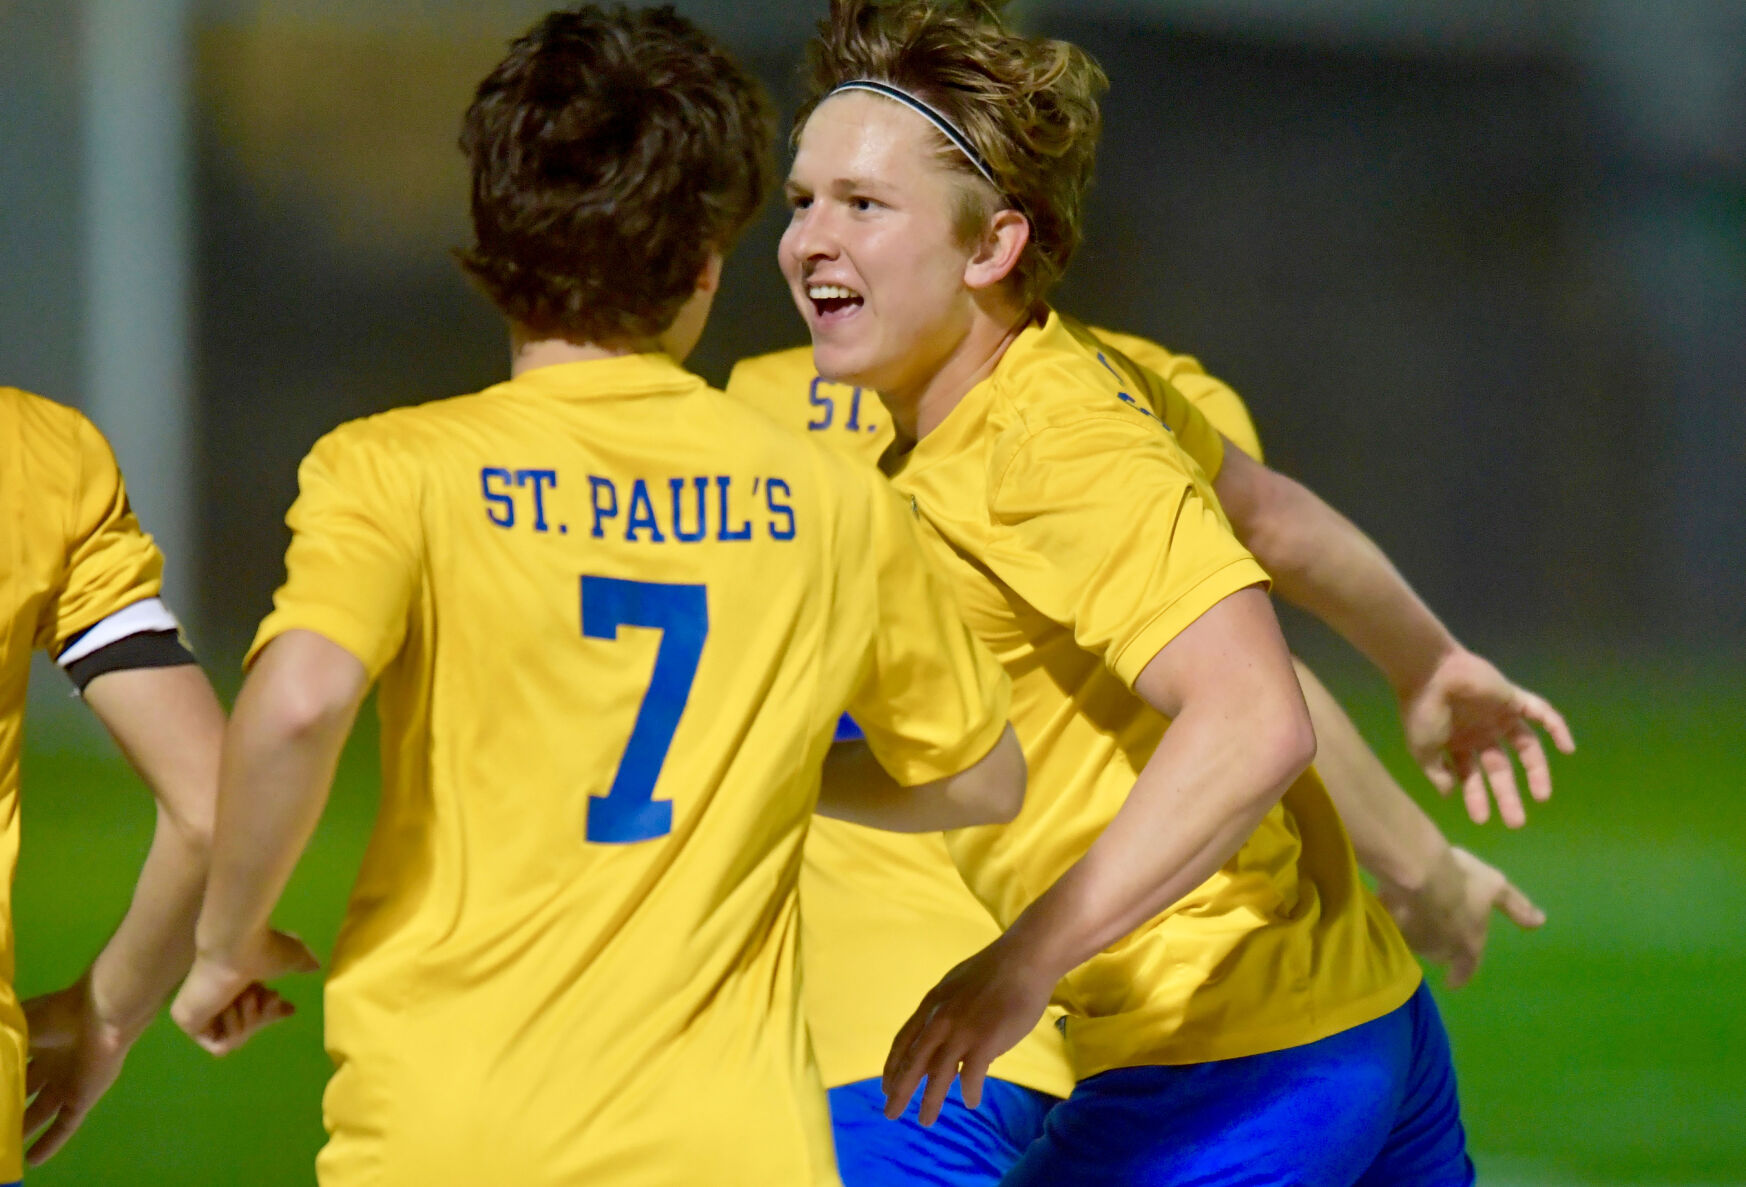 Owen Spath’s Hat Trick Leads St. Paul’s Soccer Team to Victory in Second-Round Playoff Match